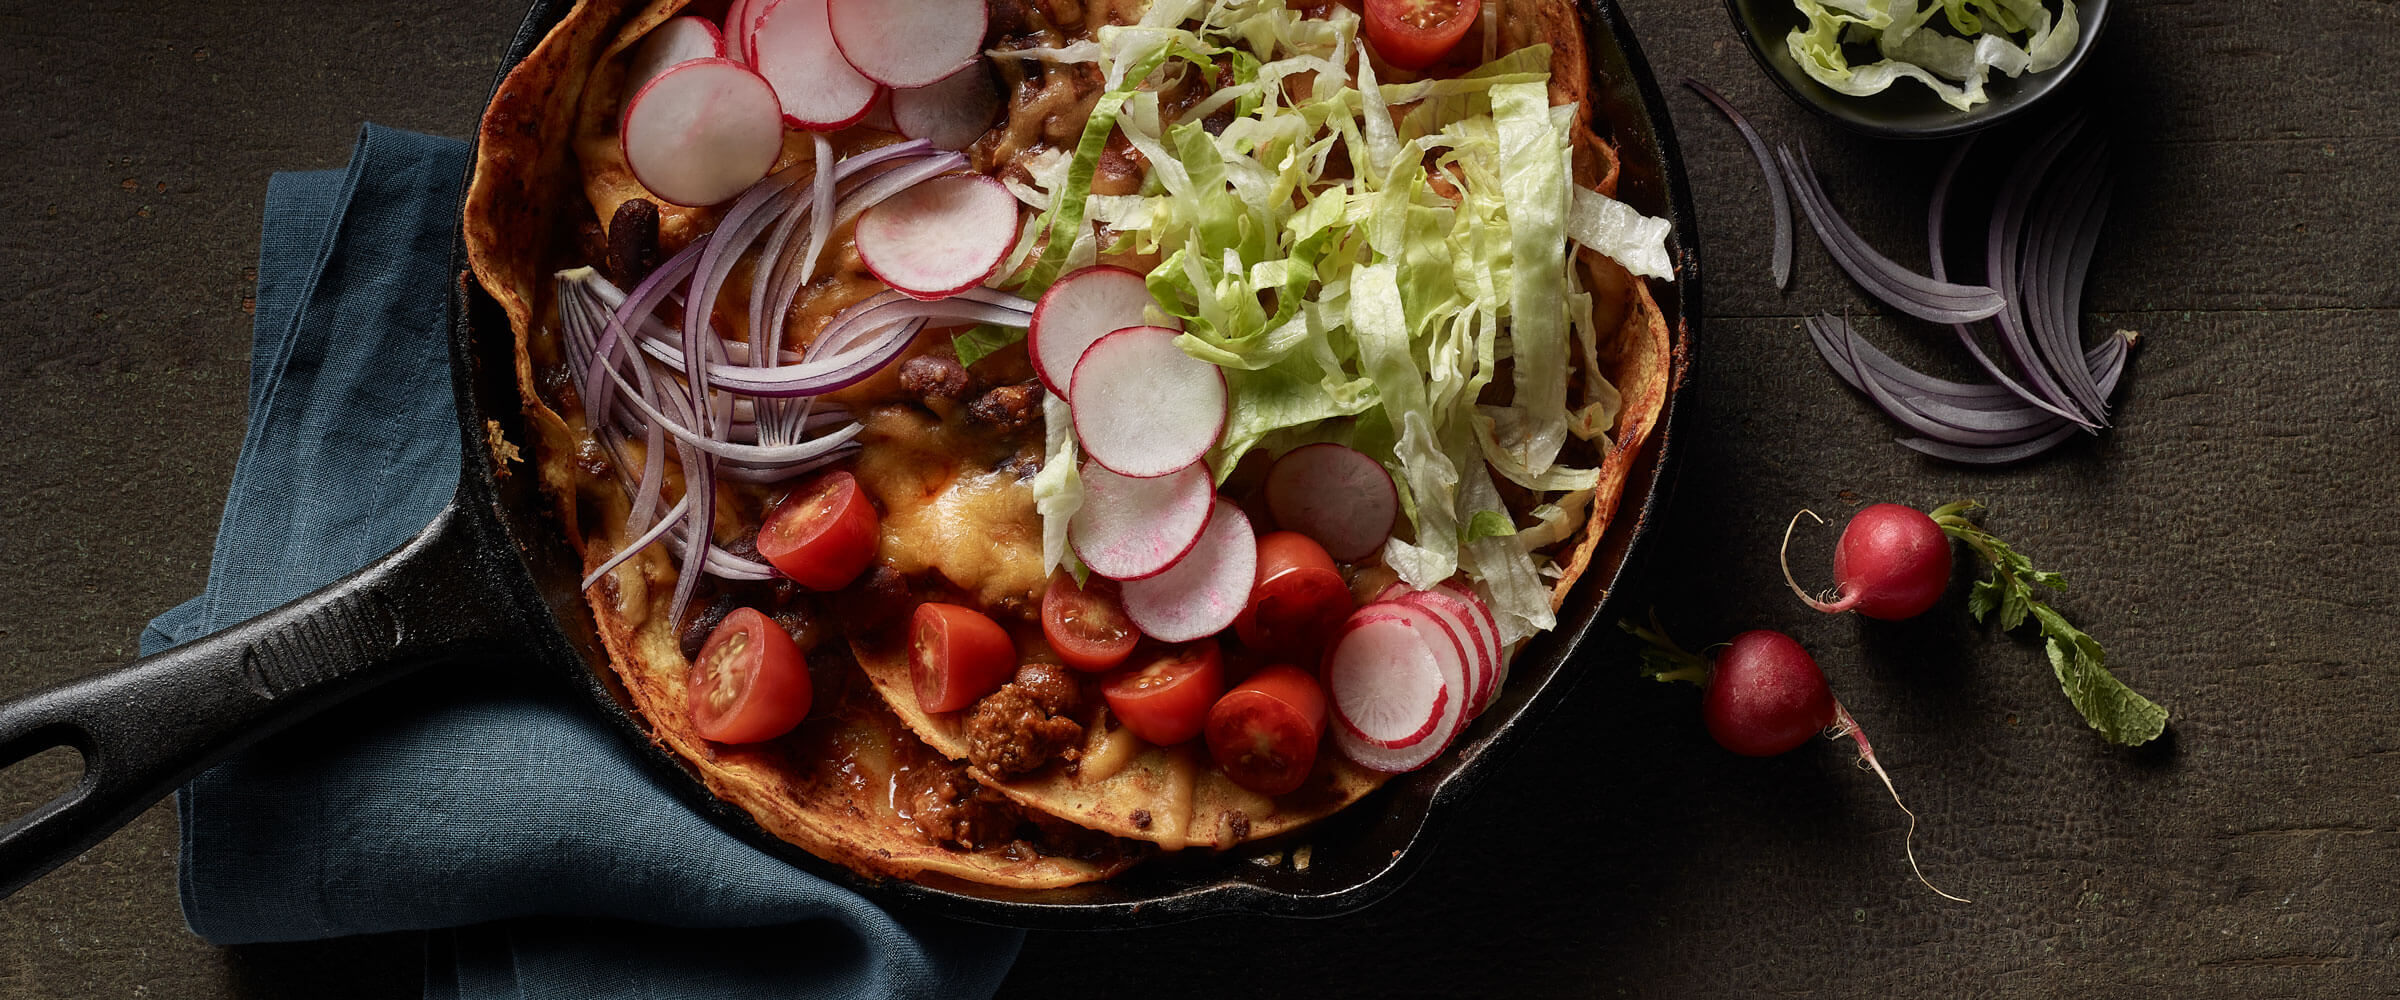 Layered Chili Enchiladas topped with radish, lettuce and tomatoes in skillet with blue napkin